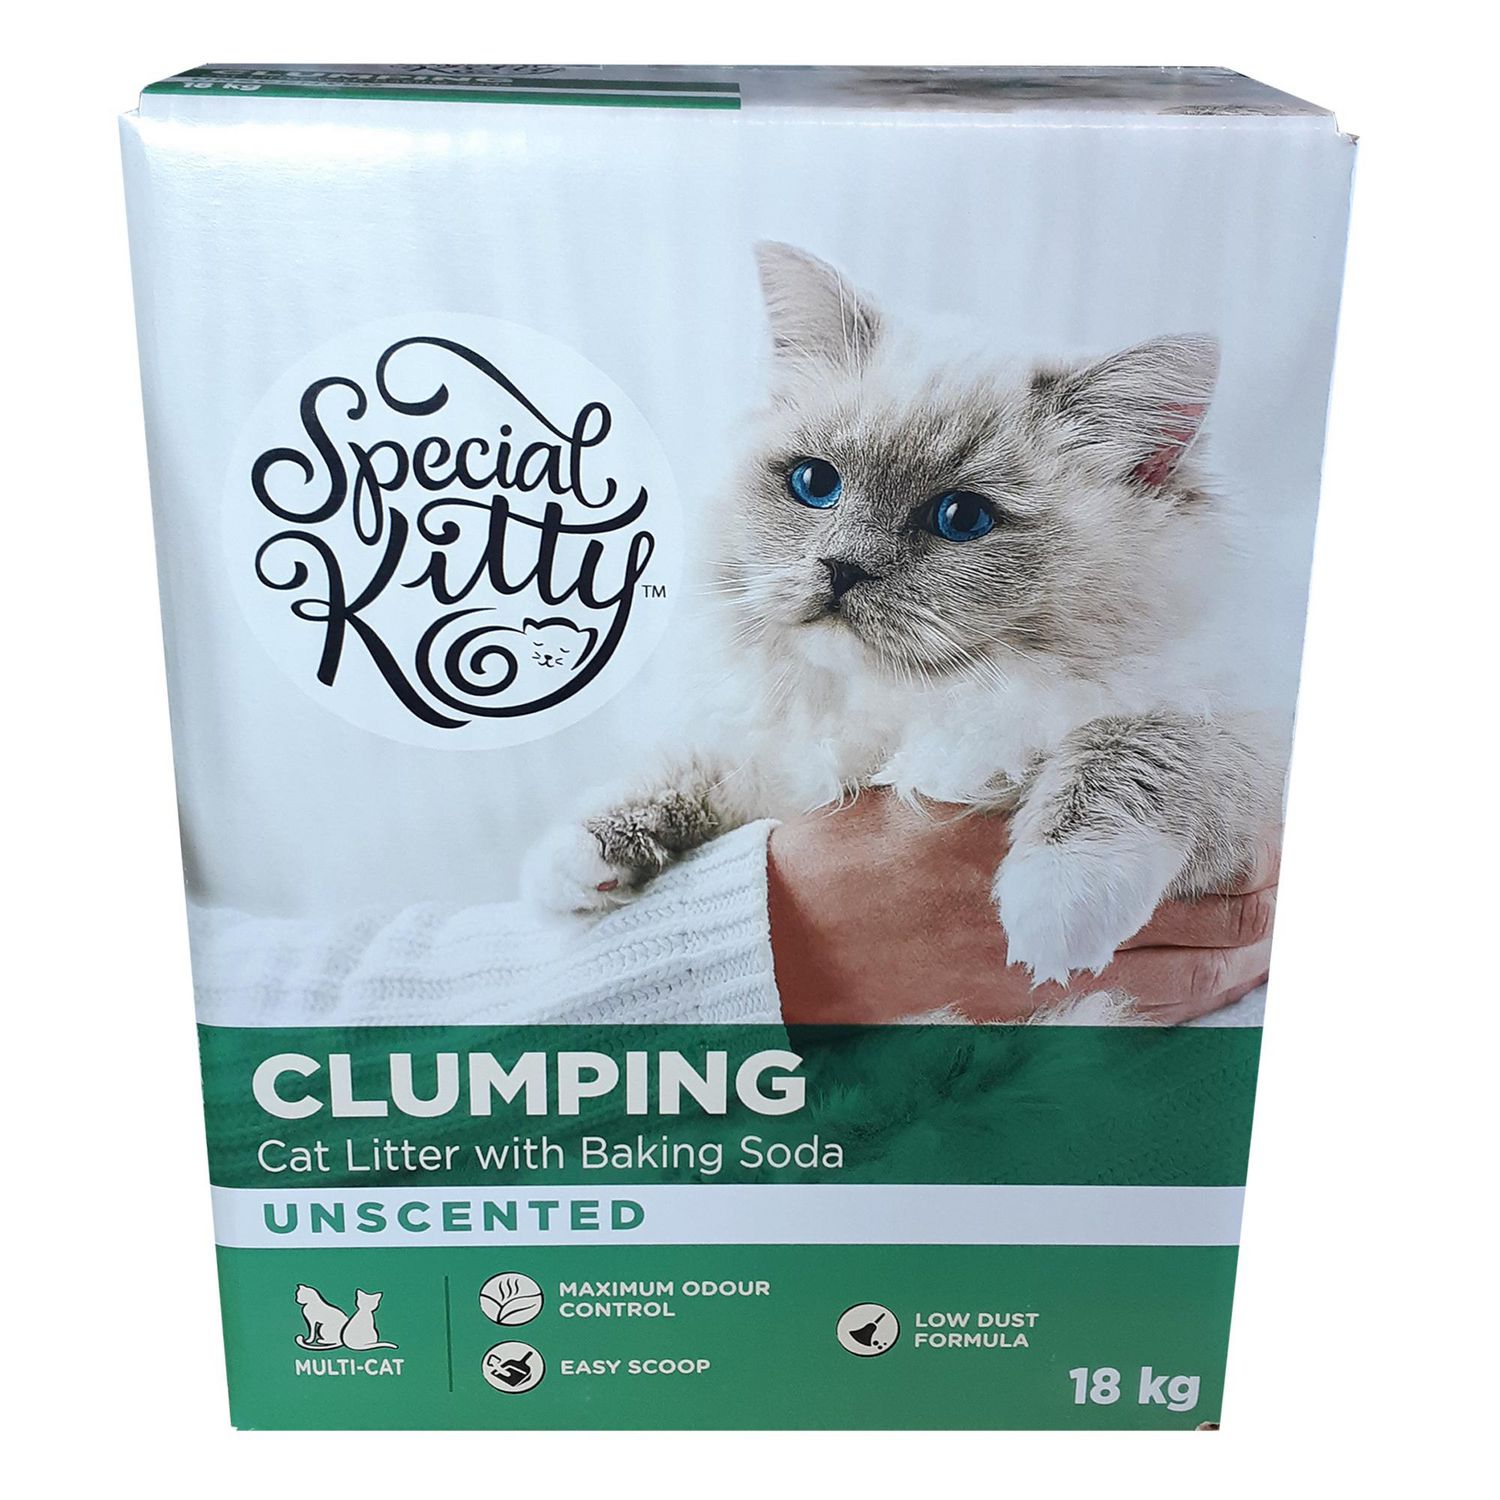 Special Kitty Clumping Cat litter with Baking Soda, Unscented Walmart